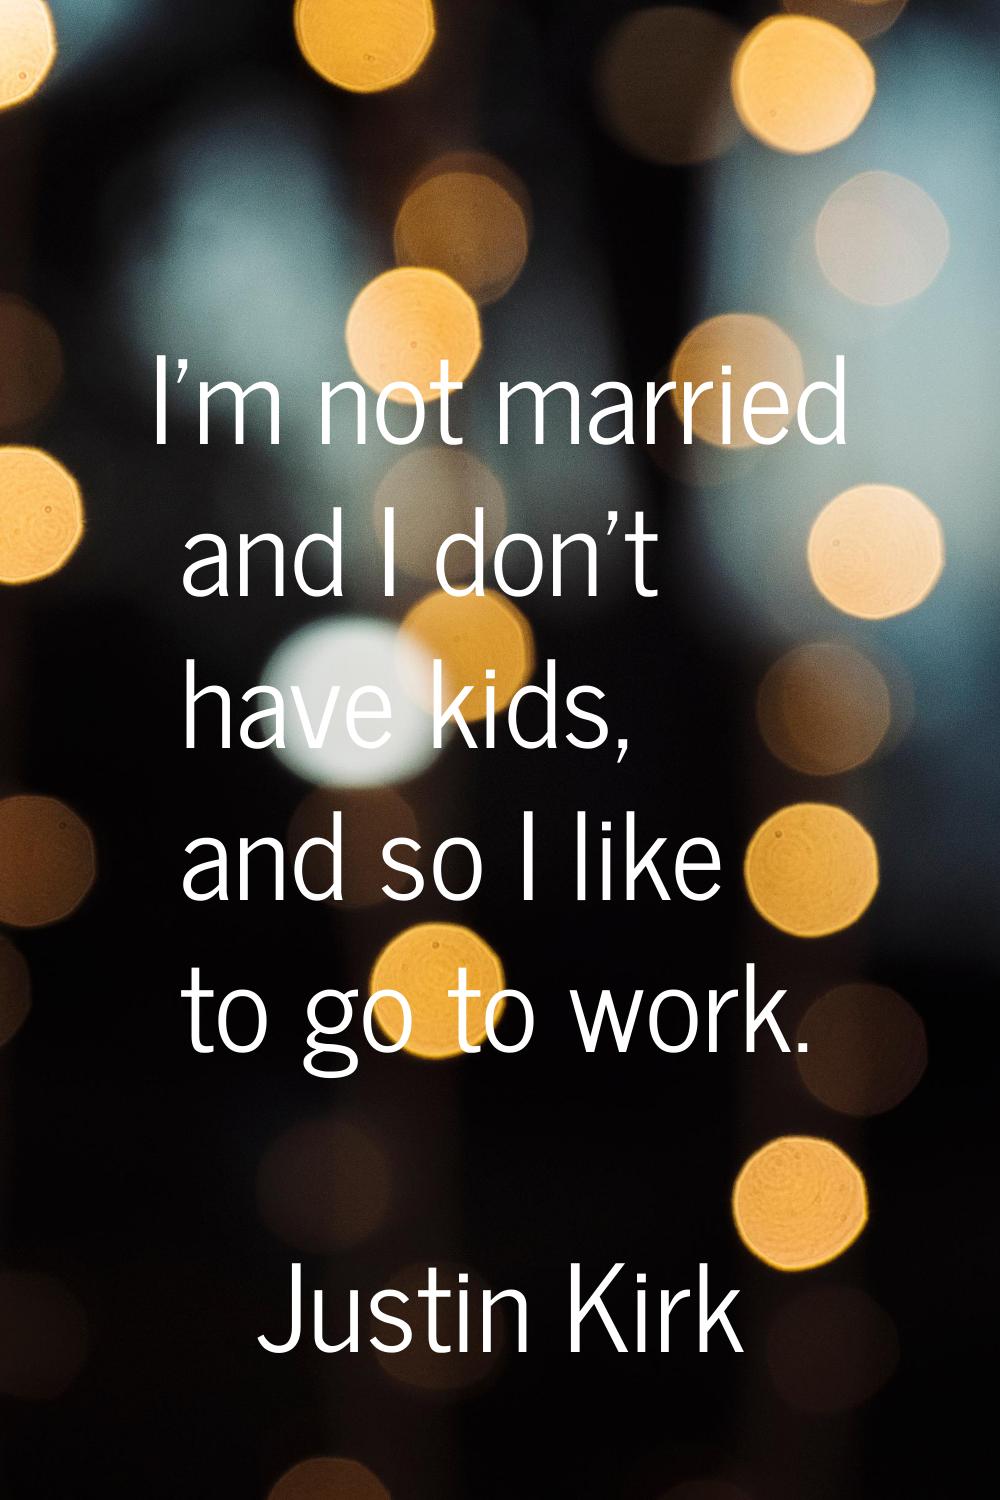 I'm not married and I don't have kids, and so I like to go to work.